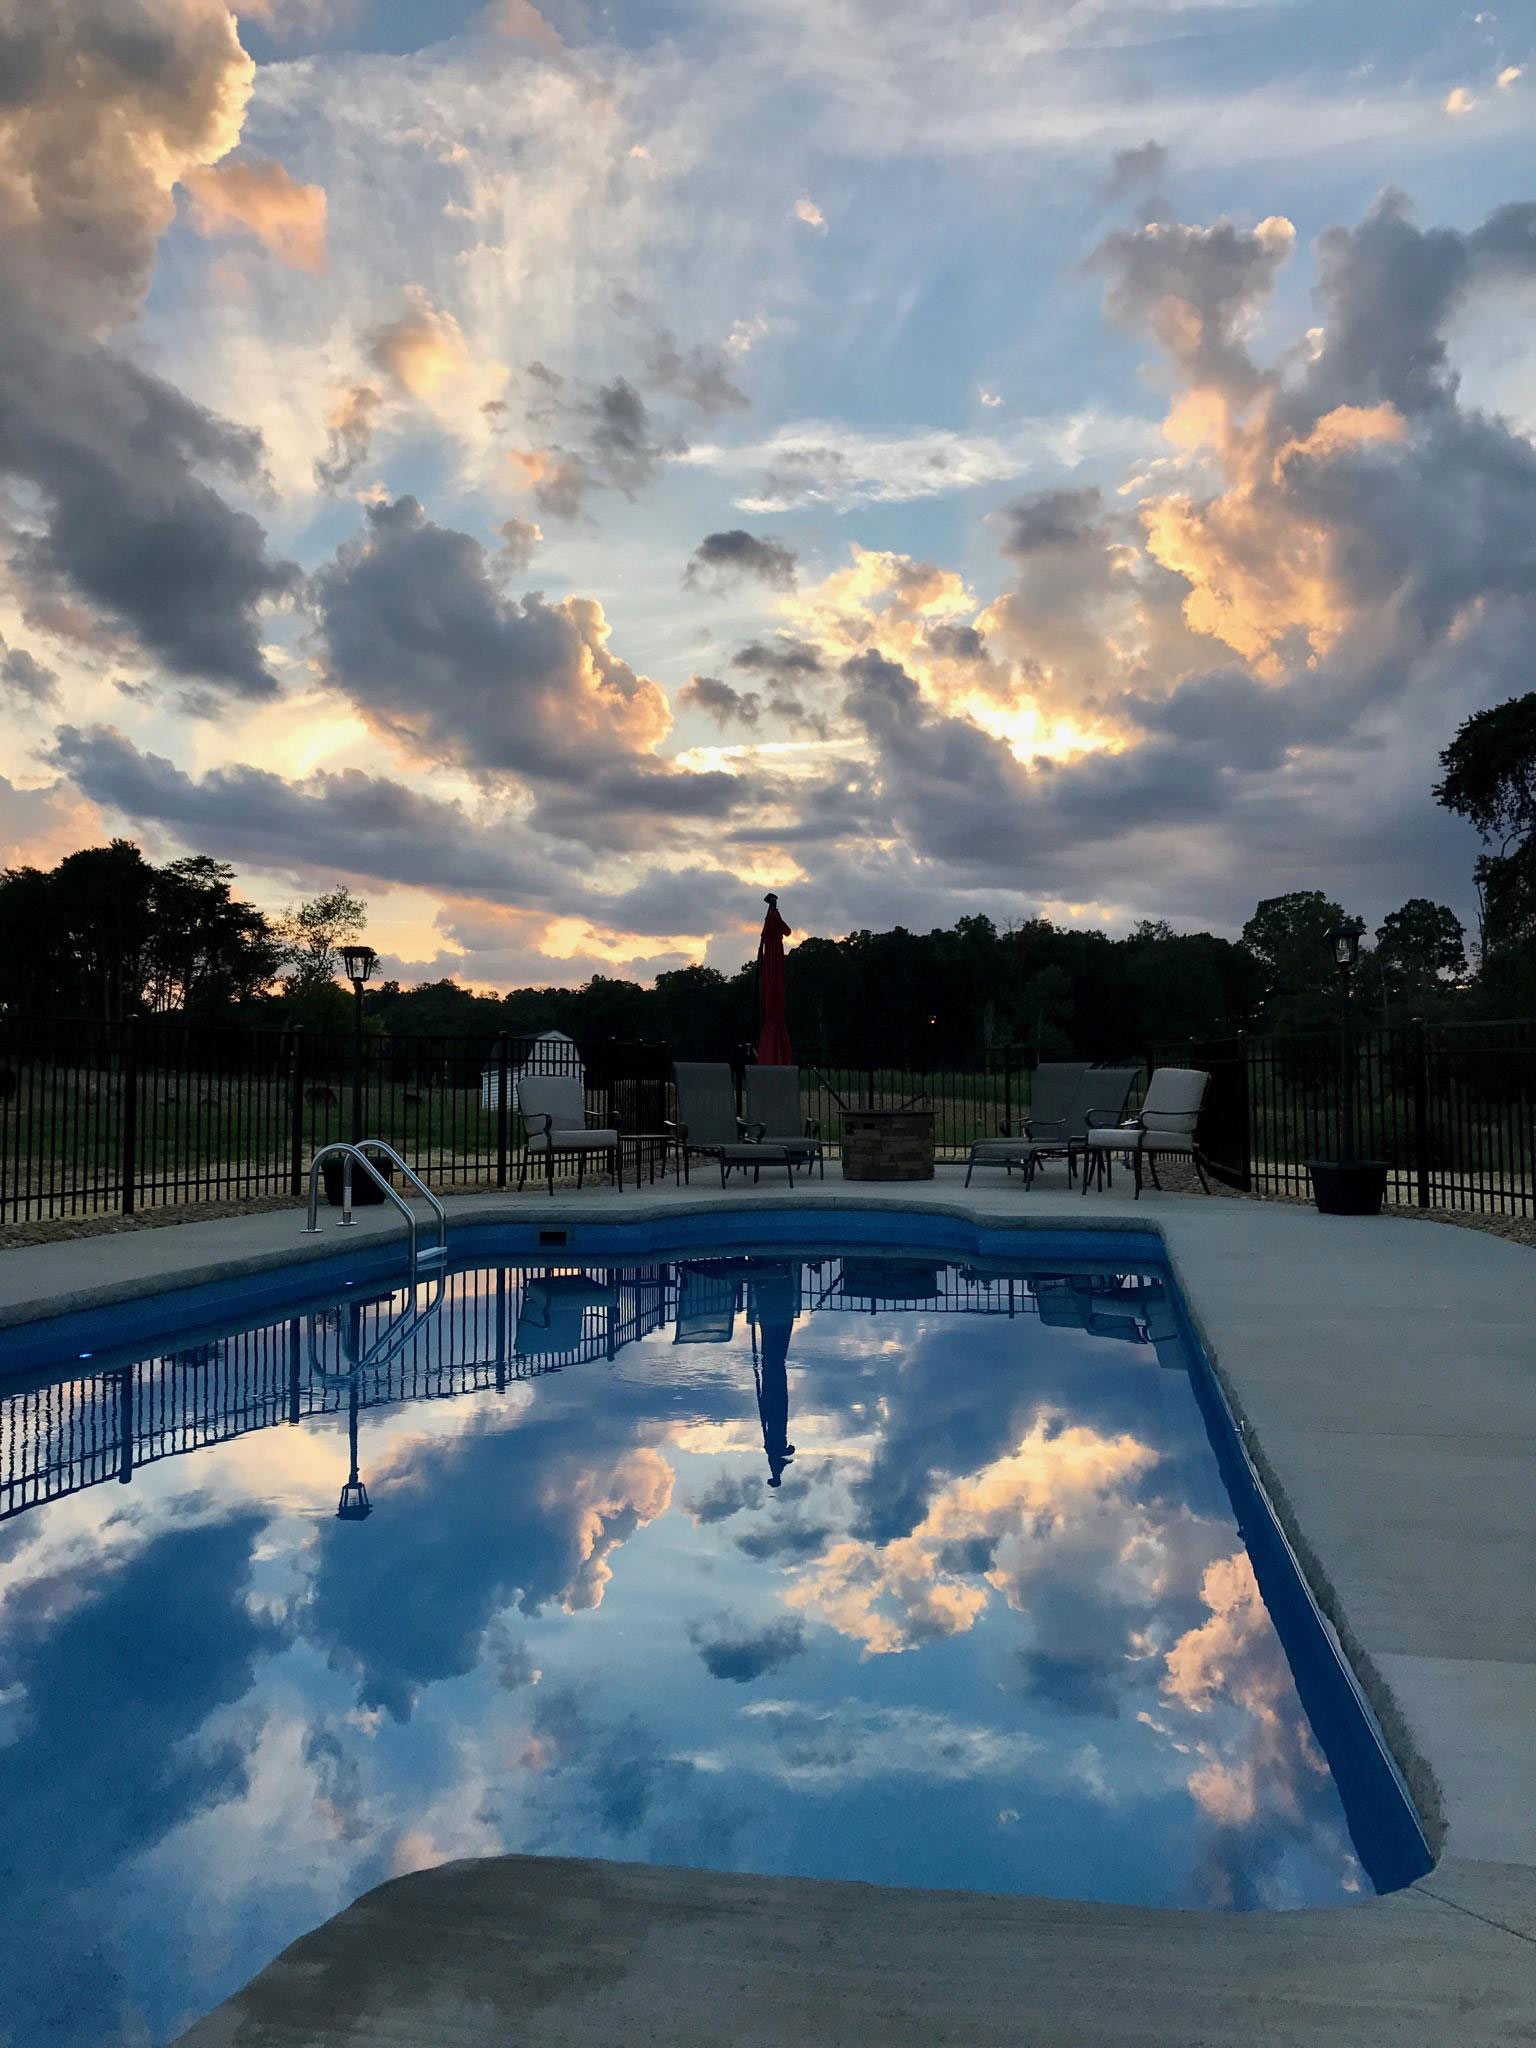 Absolutely Astounding Photo of Dark Swimming Pool at Sunset with Clouds and Sunbeams